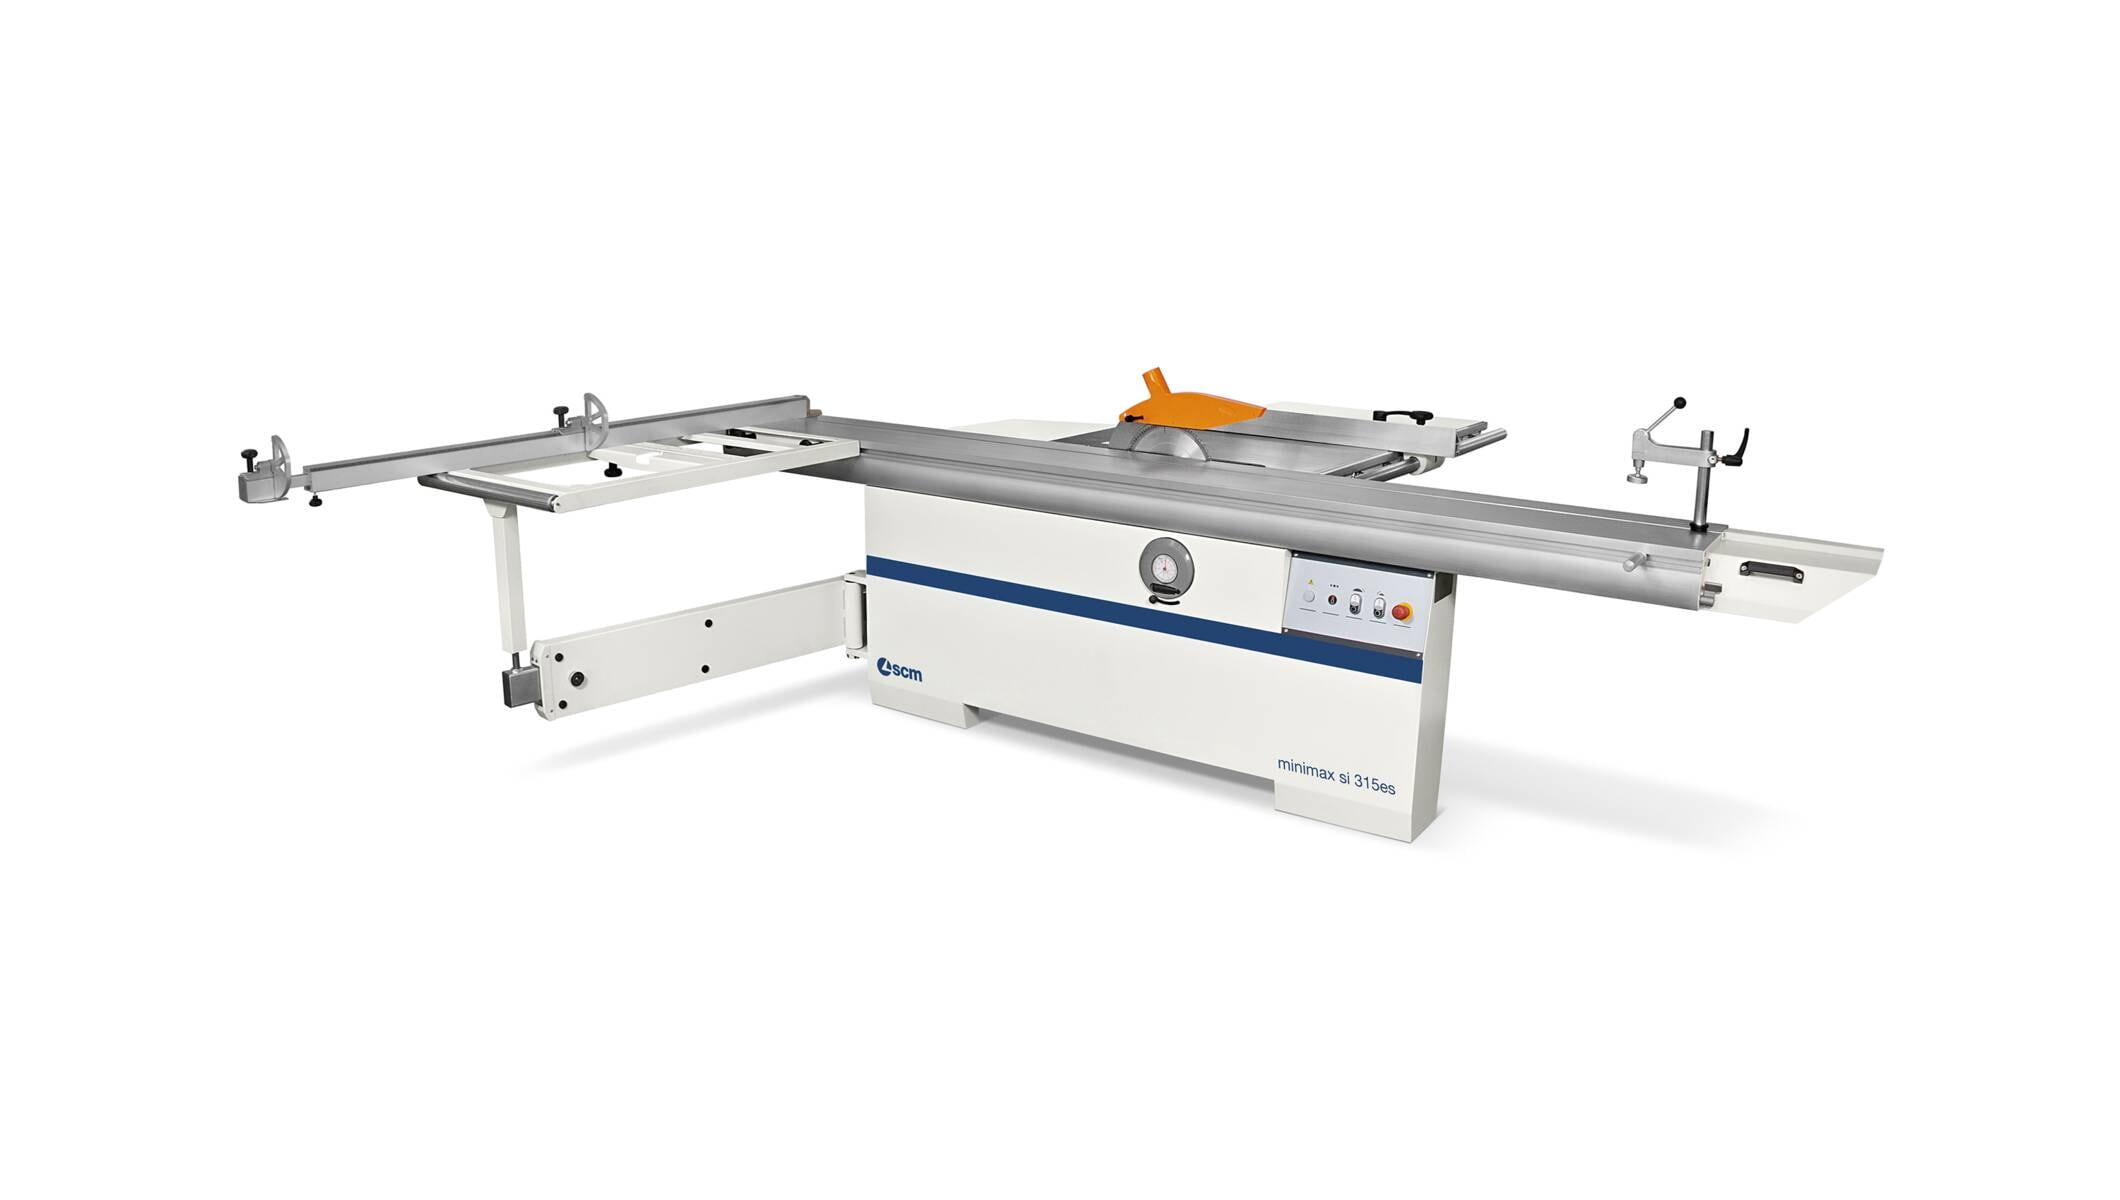 Joinery machines - Sliding table saws - minimax si 315es